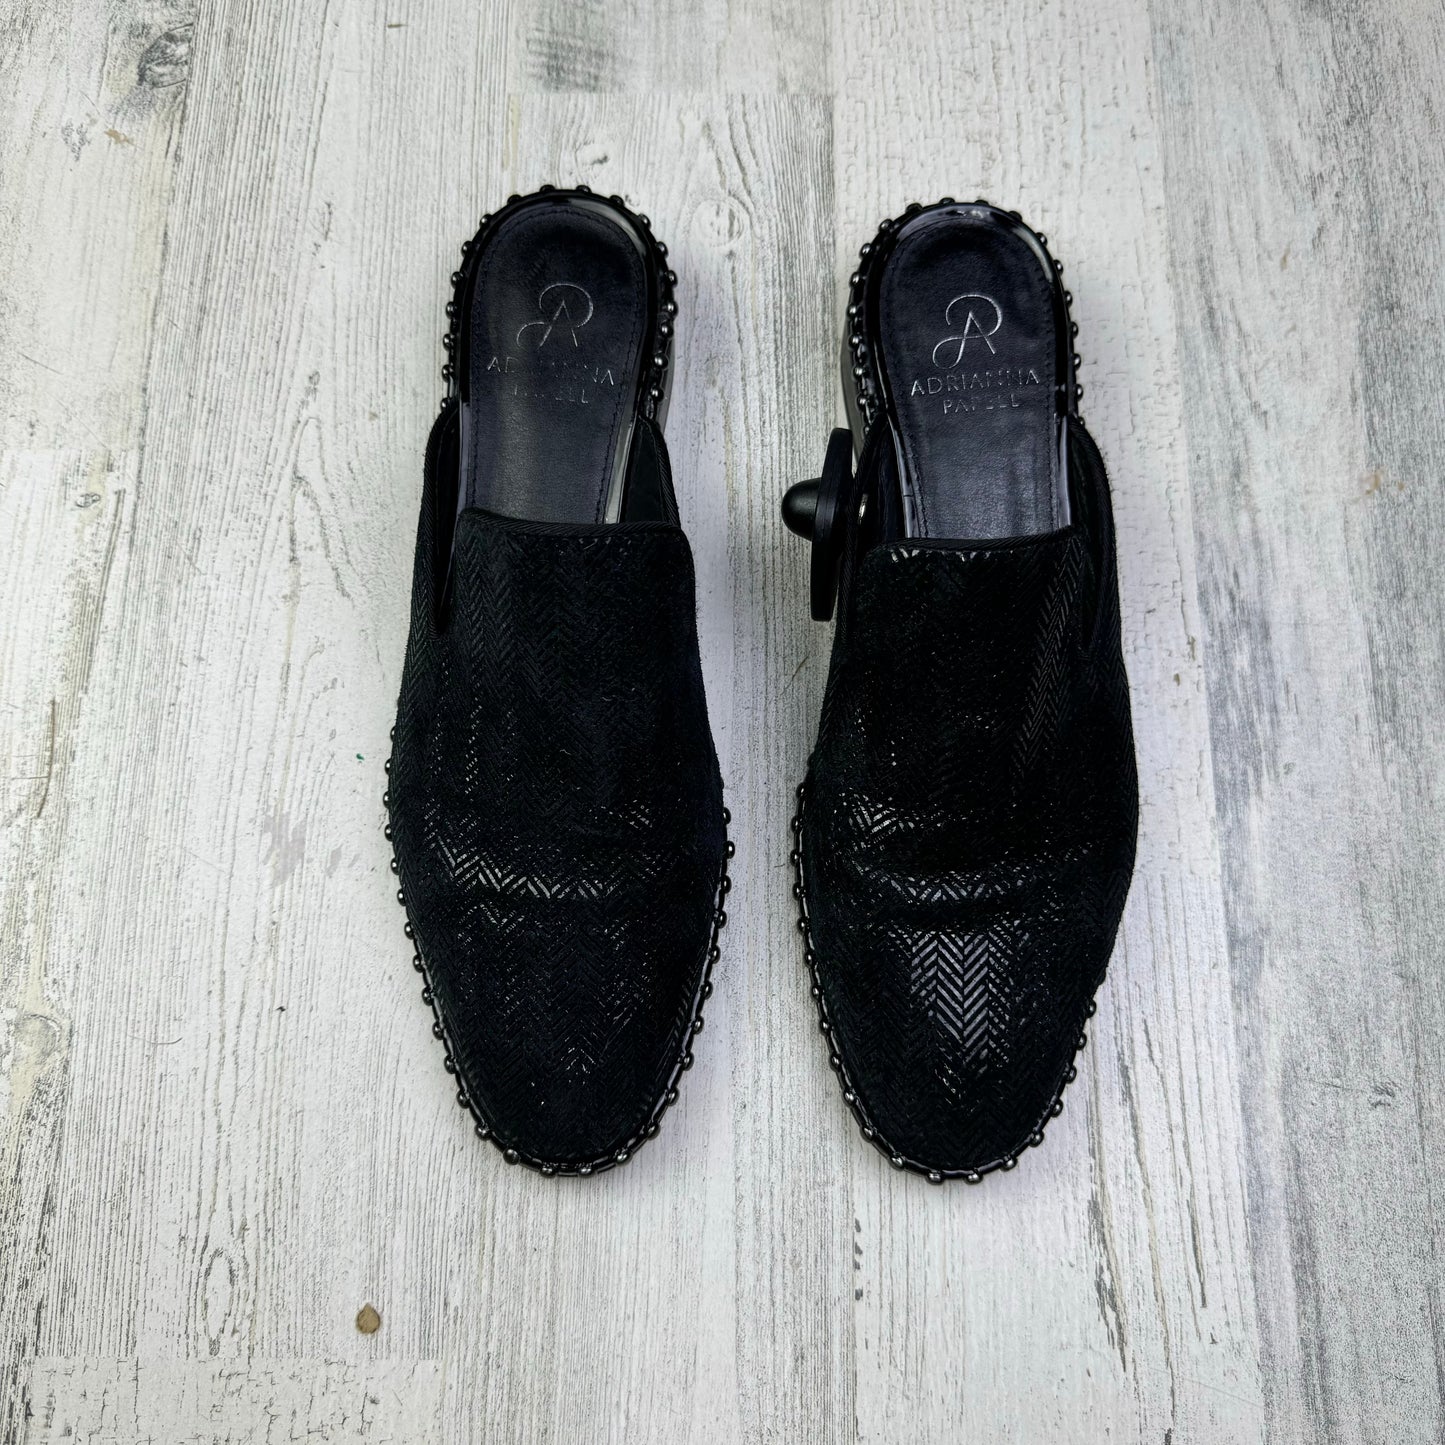 Black Shoes Flats Adrianna Papell, Size 8